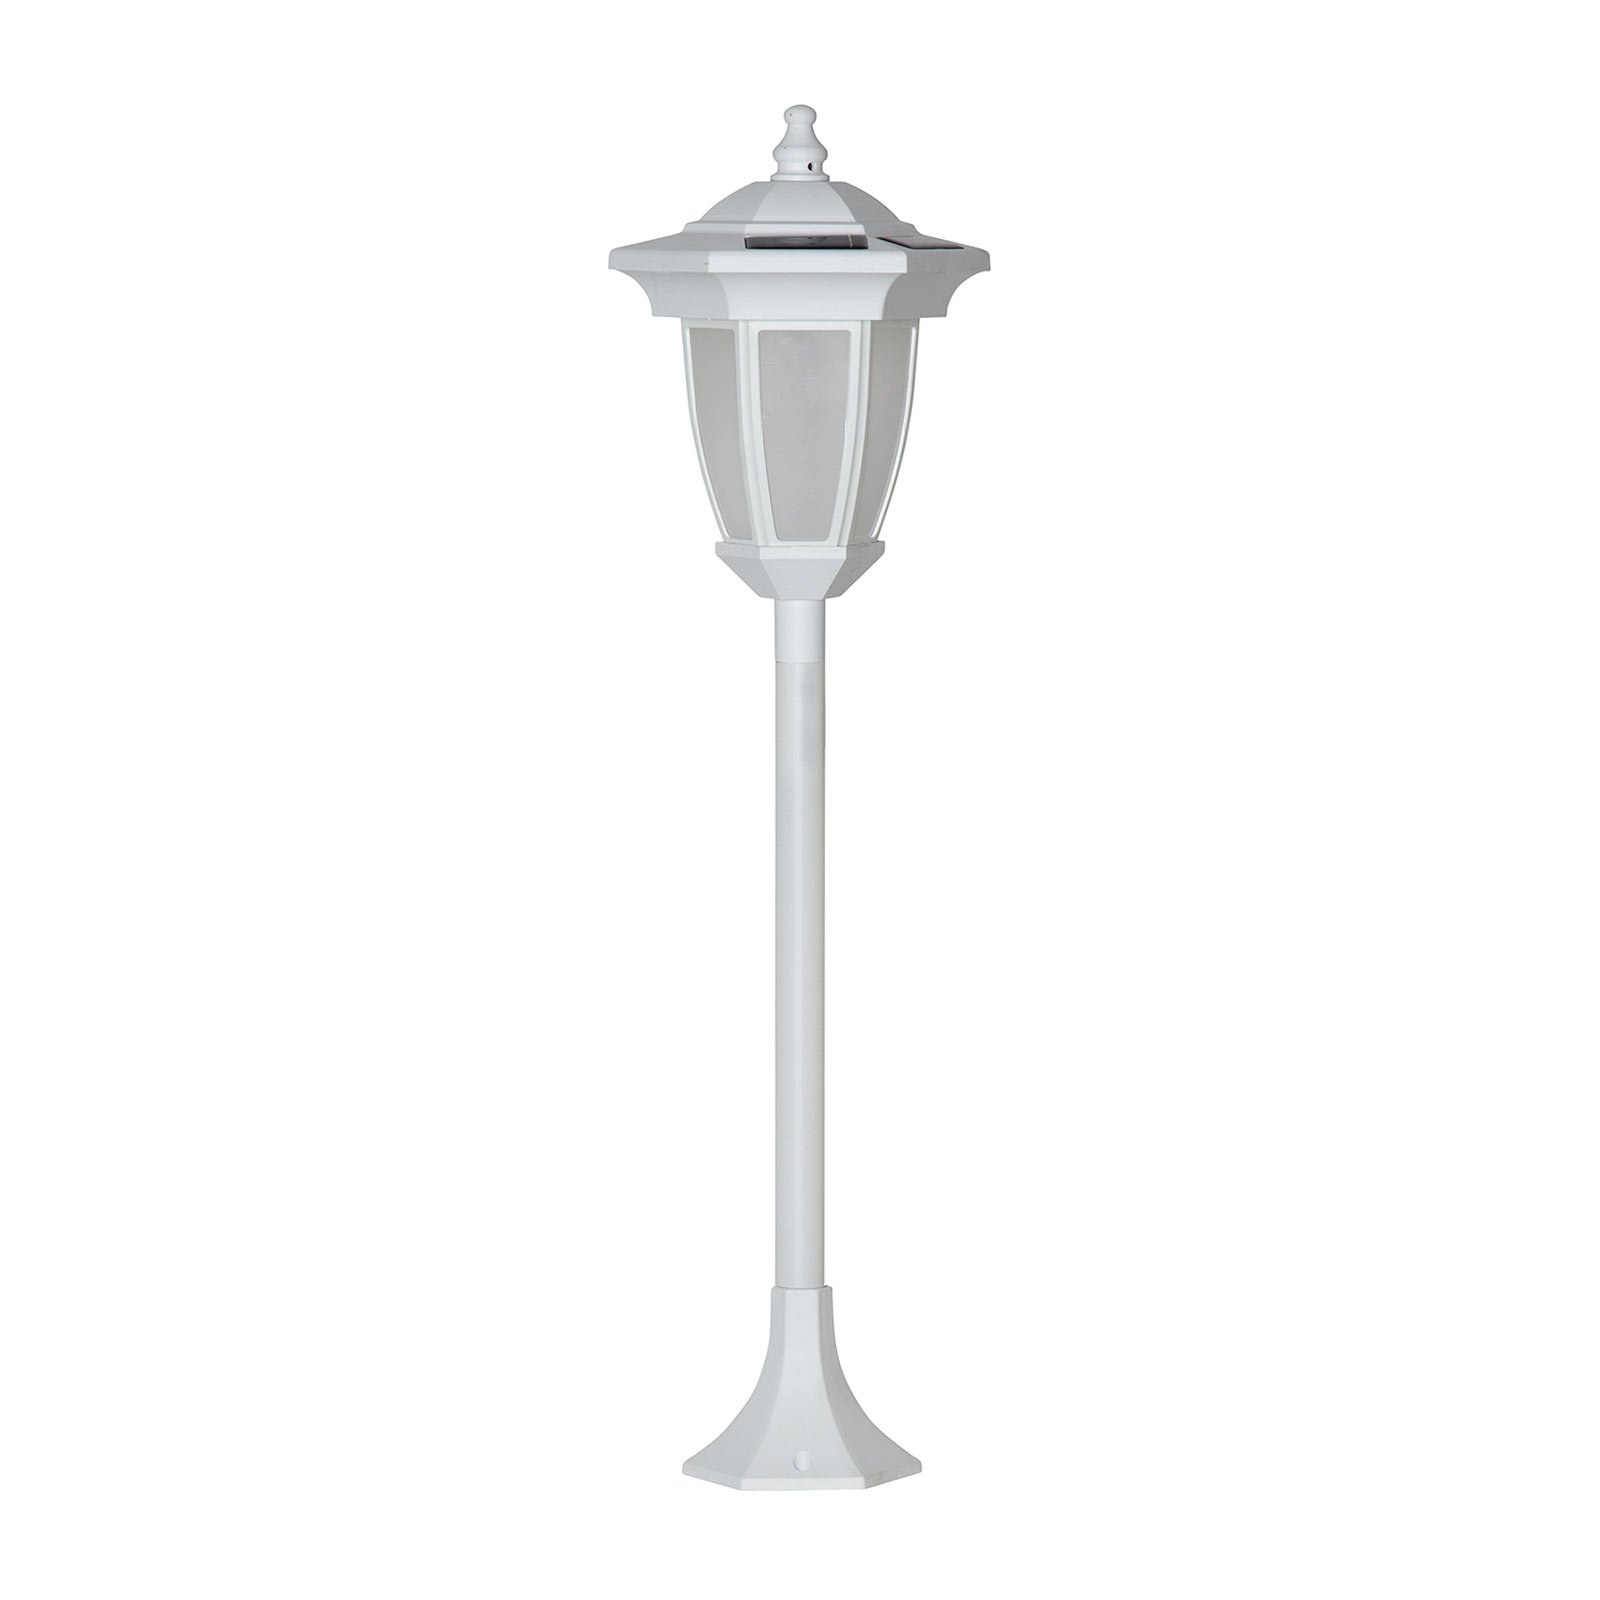 LED-Solarleuchte Flame, 4 in 1, weiß